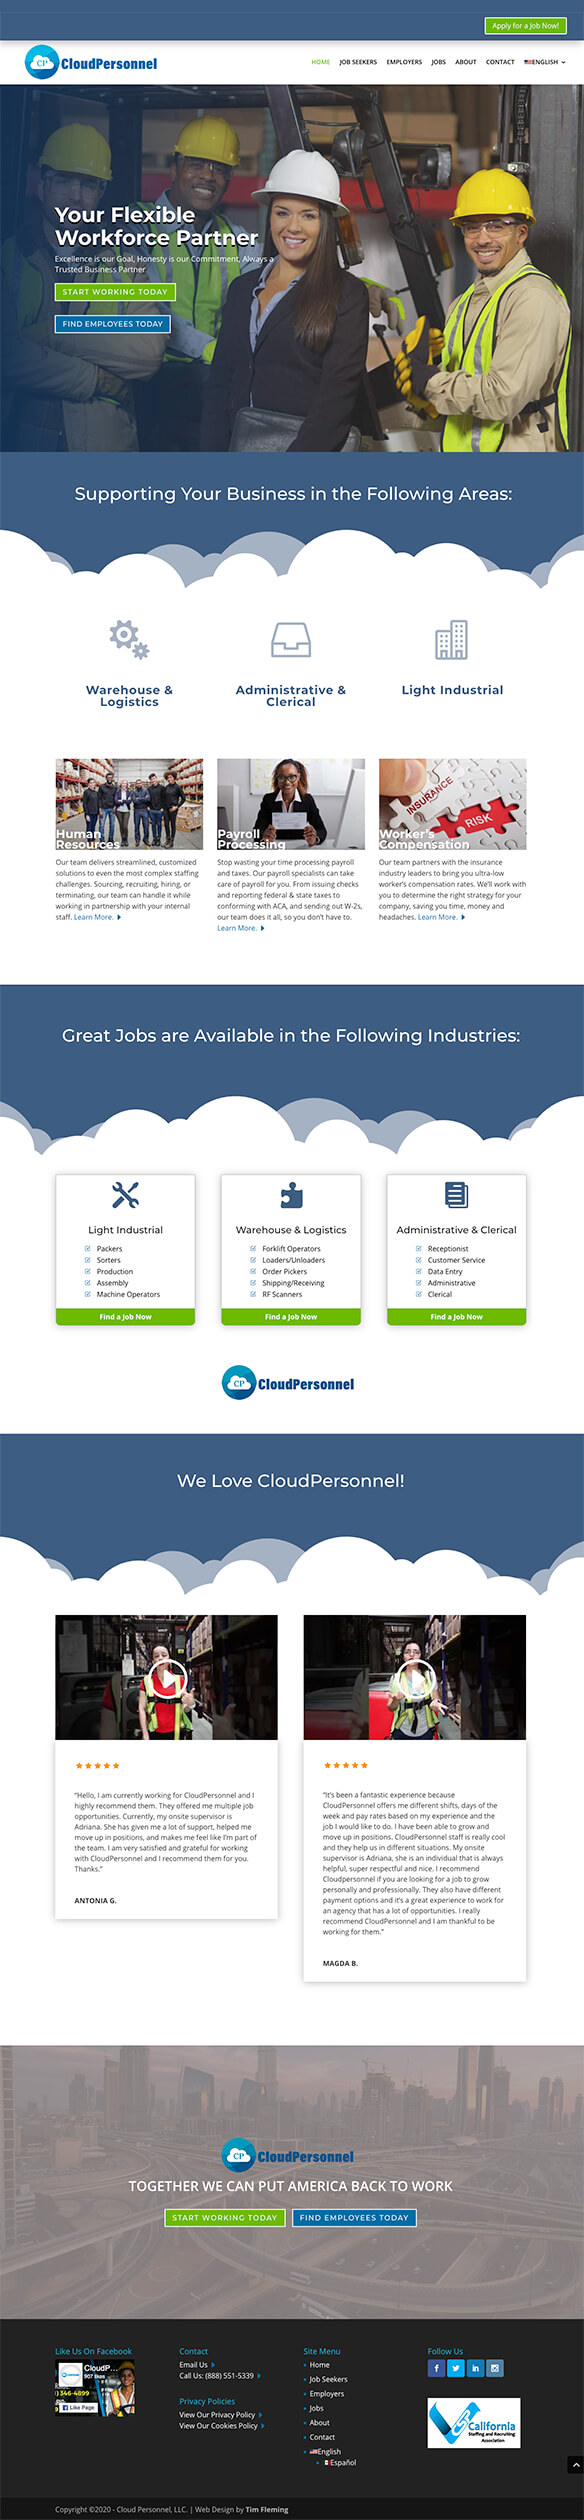 Cloudpersonnel-home page mockup